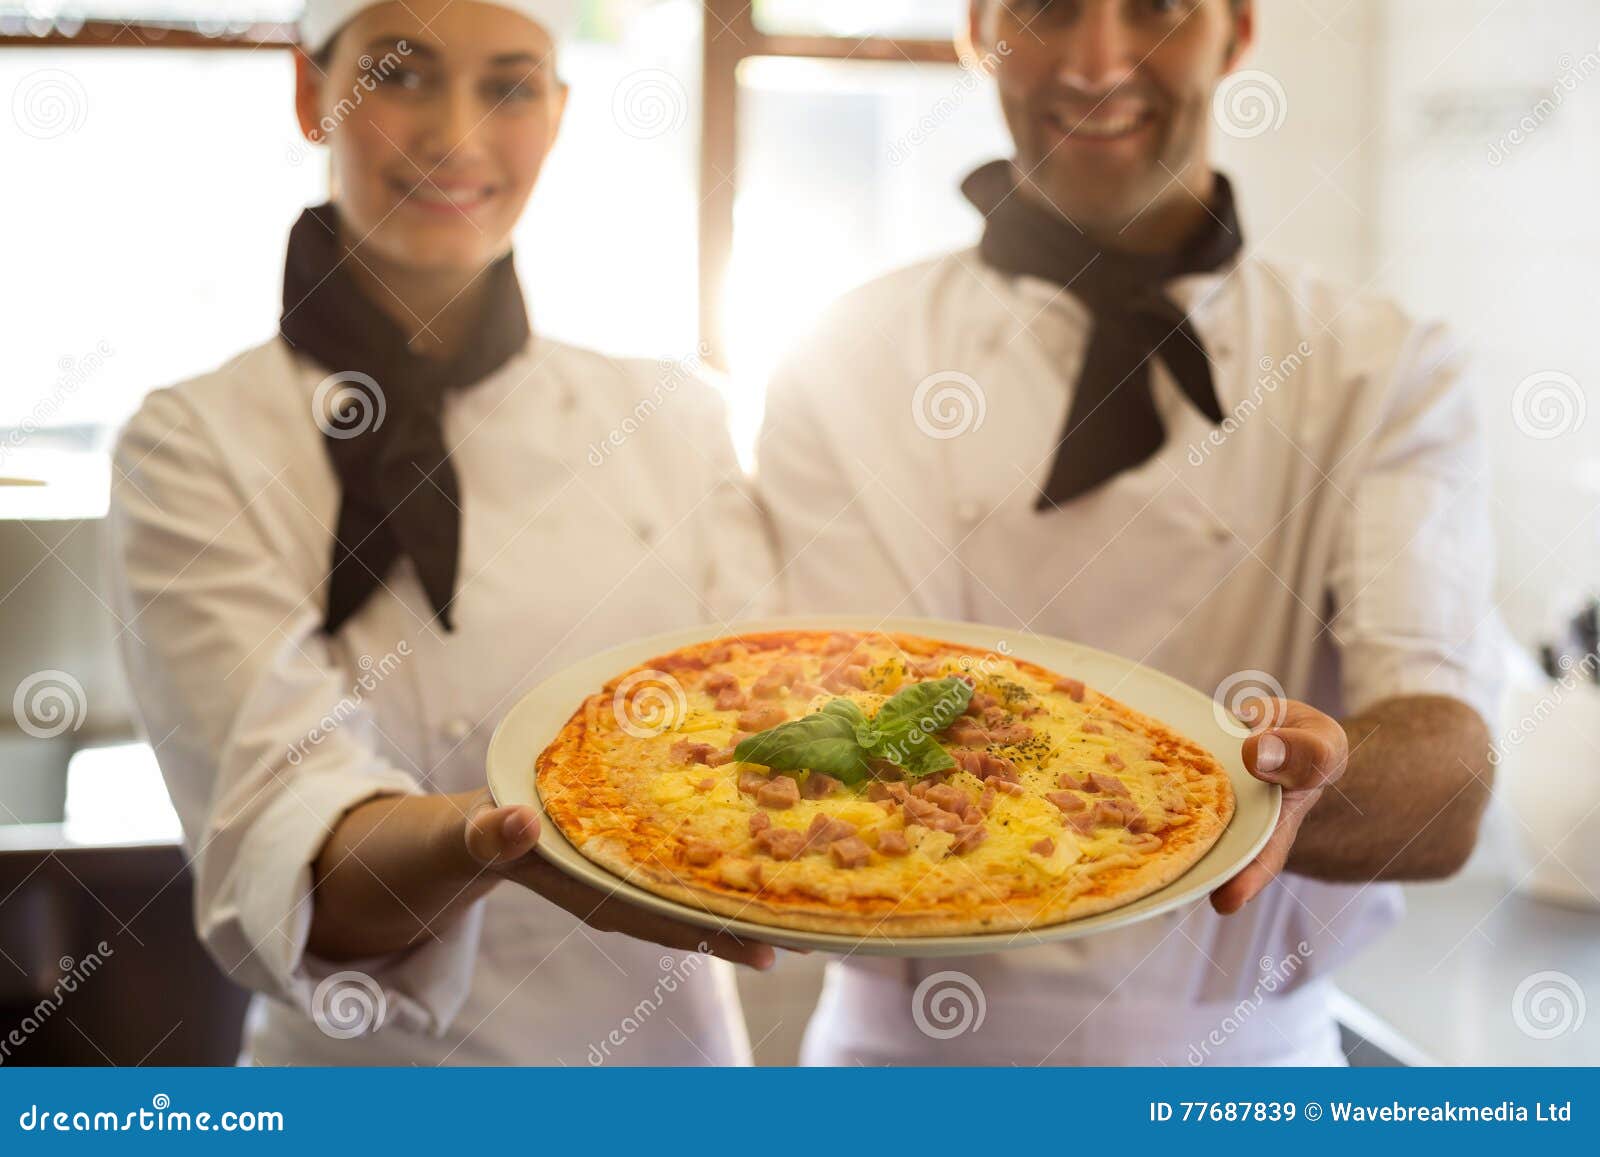 Portrait of Two Chef Presenting a Pizza Stock Image - Image of plate ...